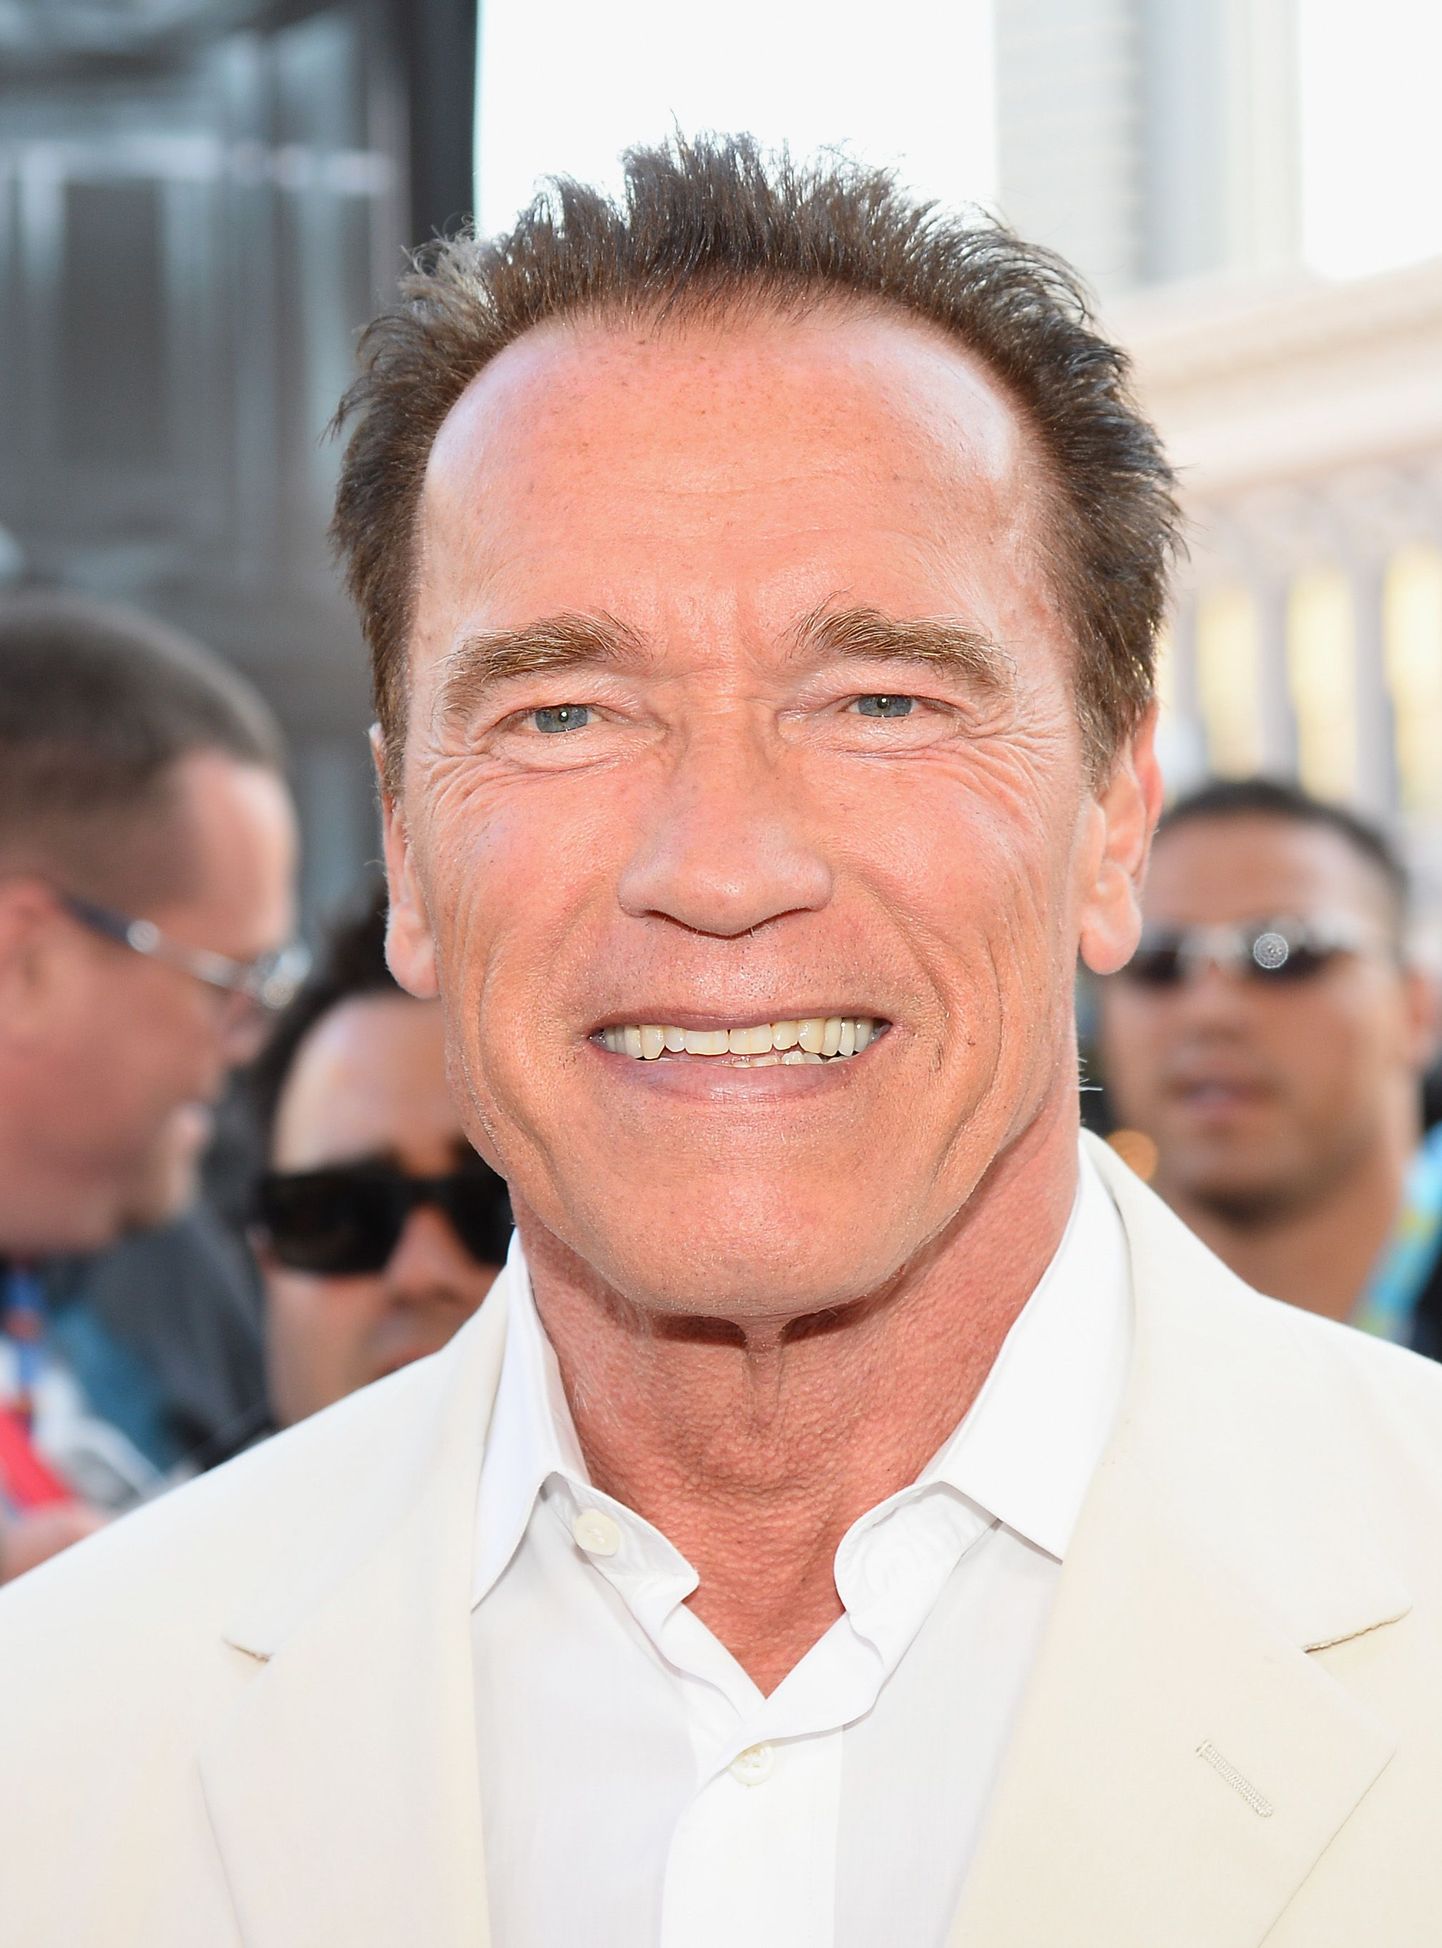 SAN DIEGO, CA - JULY 18: Actor and former California Gov. Arnold Schwarzenegger arrives at the "Escape Plan" premiere during Comic-Con International 2013 at the Reading Cinemas Gaslamp on July 18, 2013 in San Diego, California.   Ethan Miller/Getty Images/AFP
== FOR NEWSPAPERS, INTERNET, TELCOS & TELEVISION USE ONLY ==